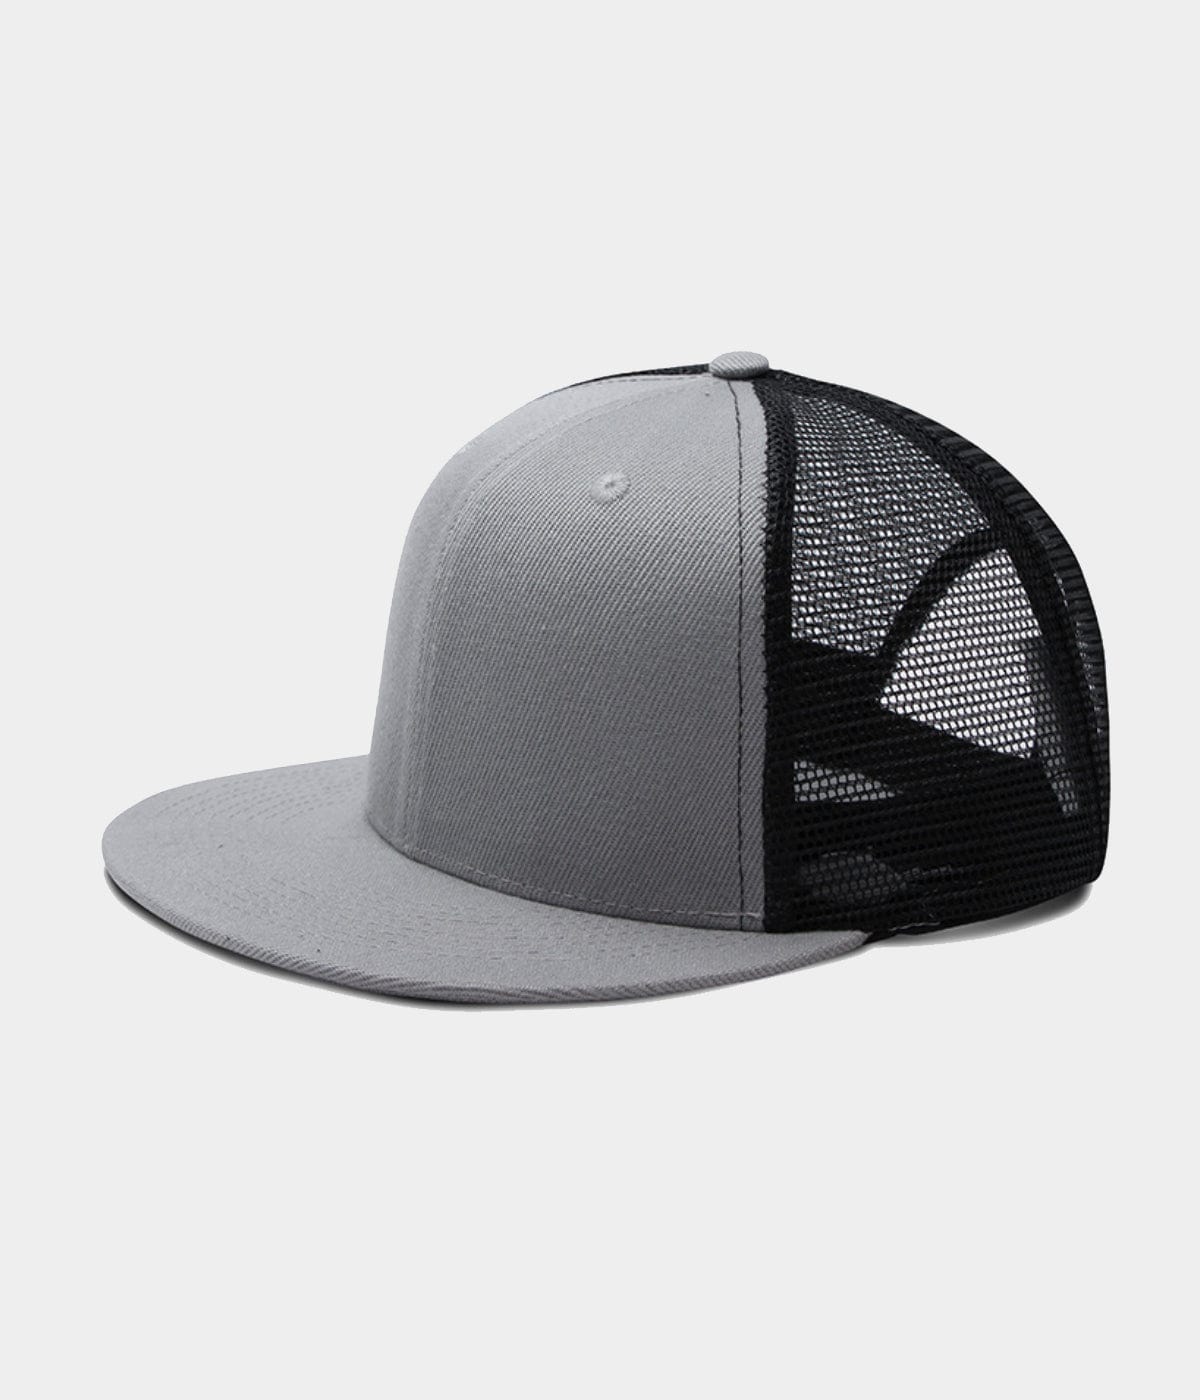 FLAT MESH. | High quality produced by CAPS